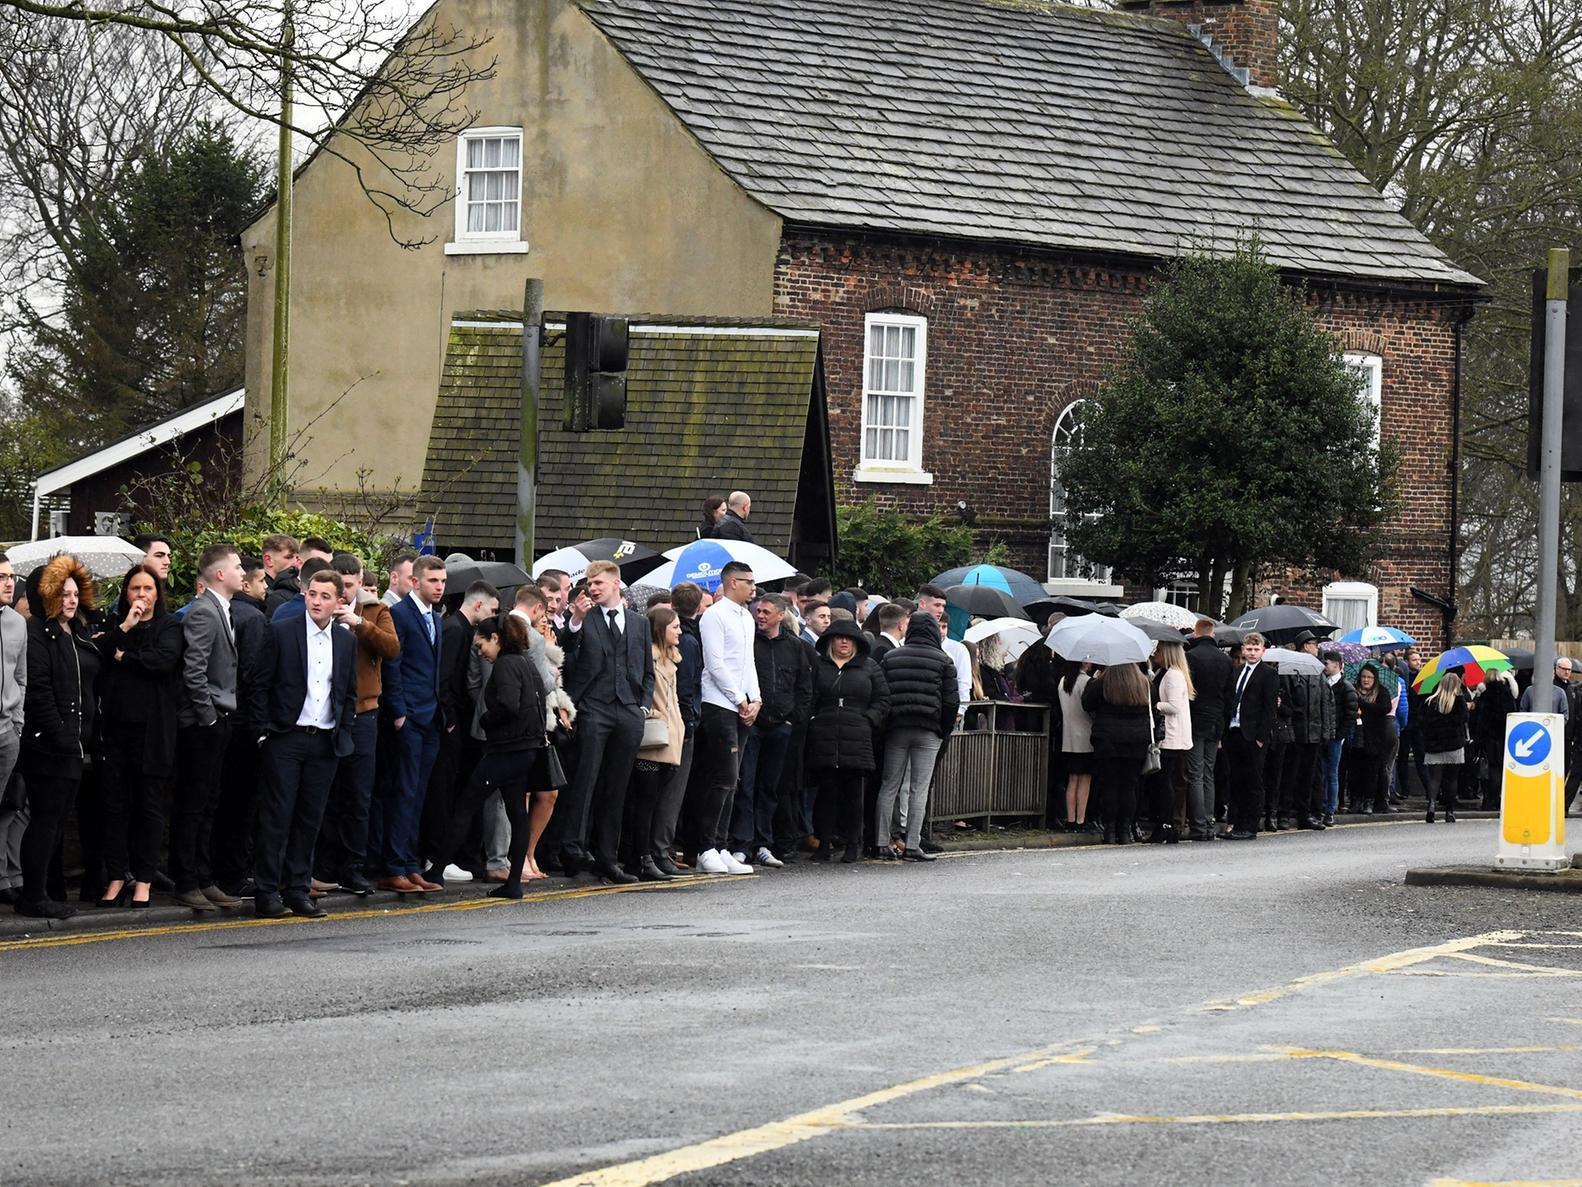 Hundreds waited for Luke's funeral procession.